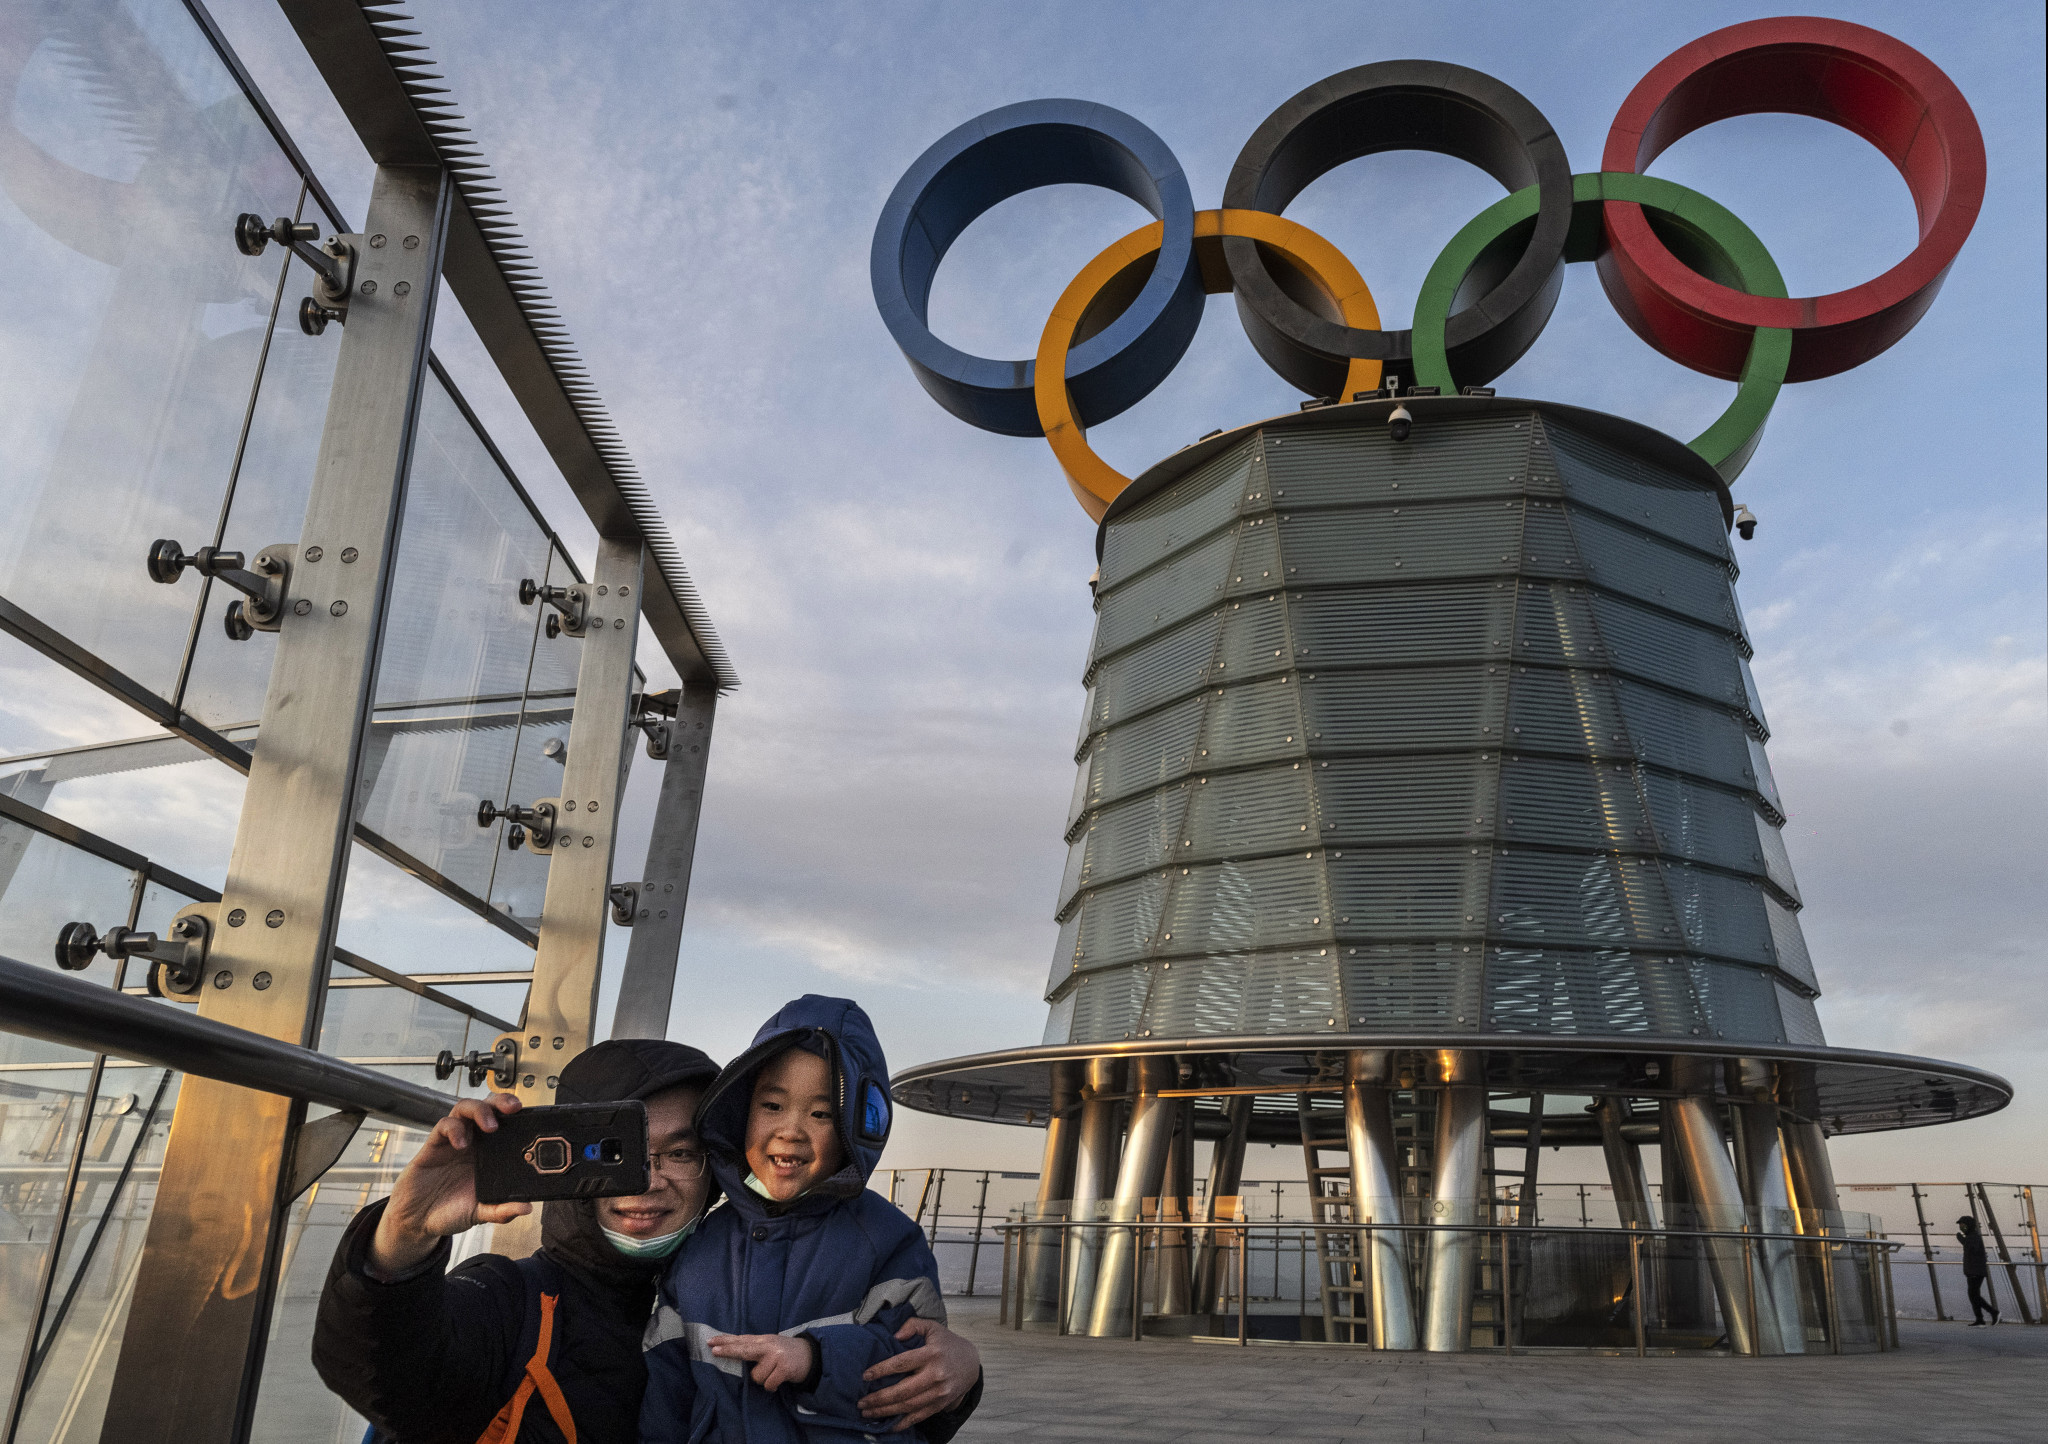 Beijing 2022 organisers have yet to make a decision over whether domestic fans will be allowed to attend the Winter Olympics ©Getty Images